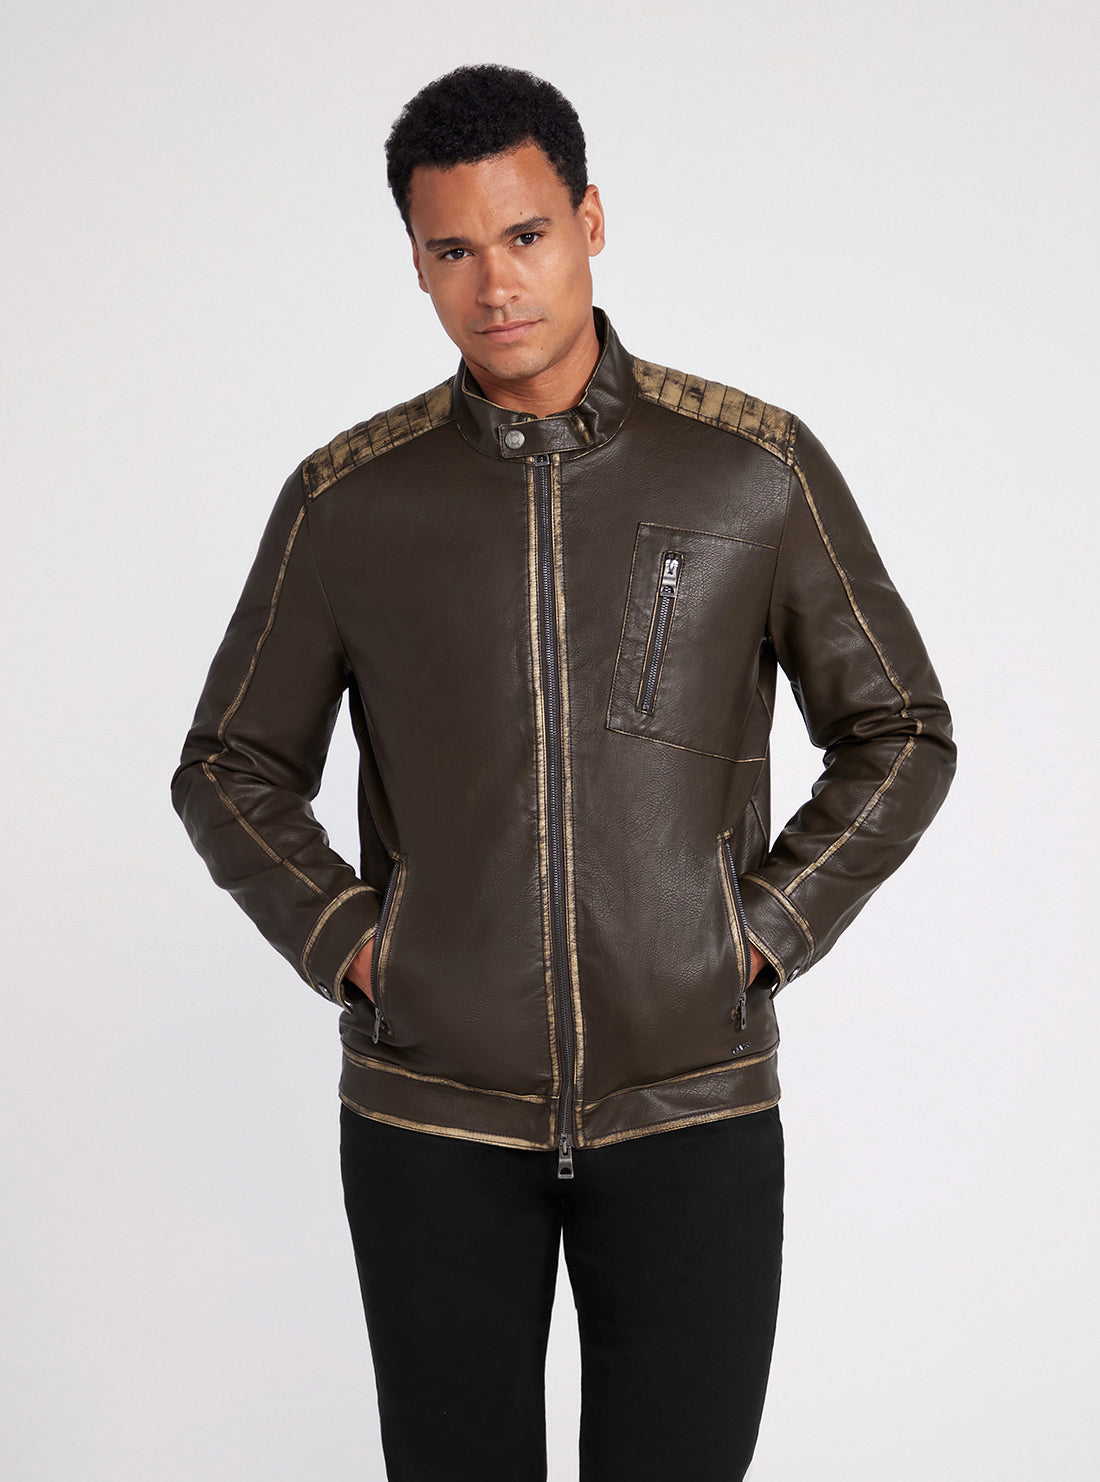 Dark Brown Washed Leather Jacket | GUESS Men's Apparel | front view